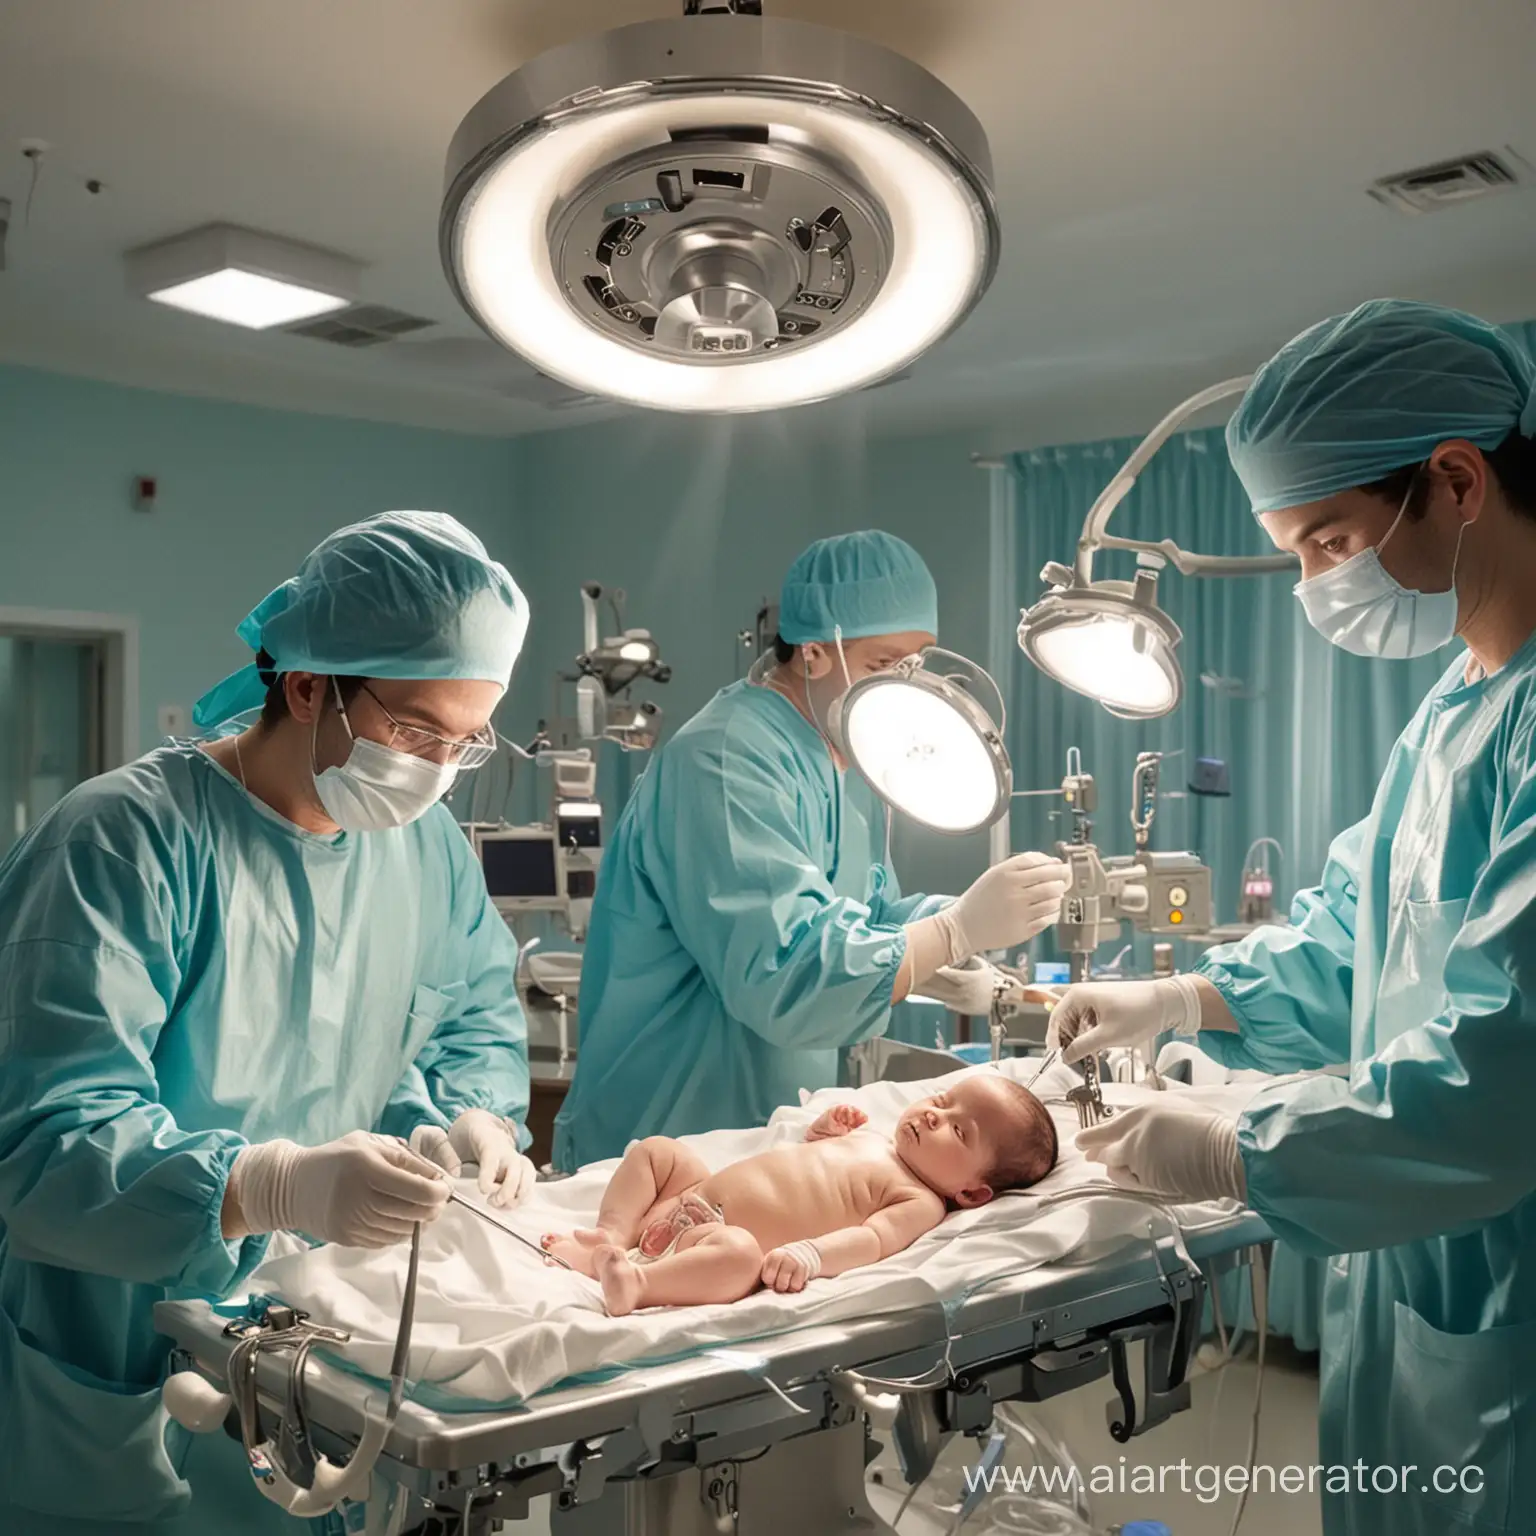 Neonatal-Surgery-Two-Surgeons-Operating-in-a-Brightly-Lit-Operating-Room